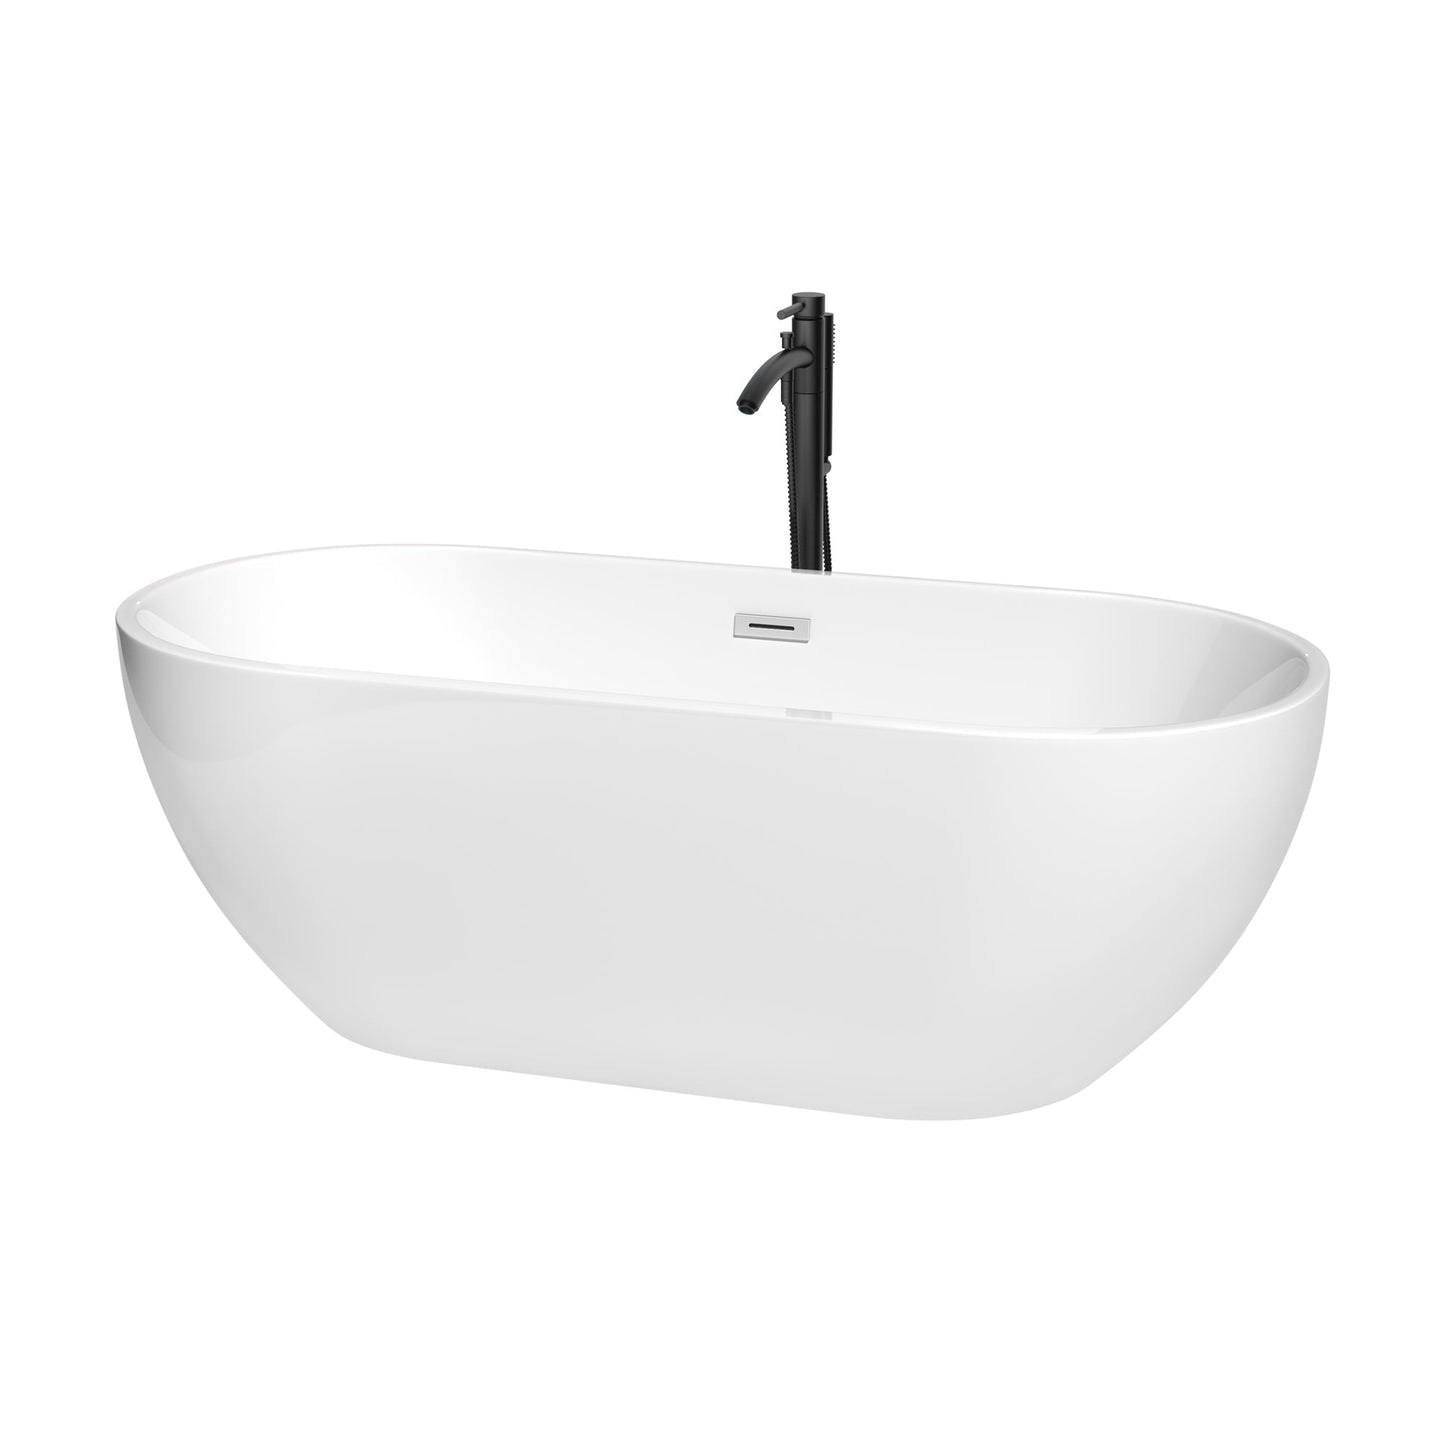 Wyndham Collection Brooklyn 67" Freestanding Bathtub in White With Polished Chrome Trim and Floor Mounted Faucet in Matte Black